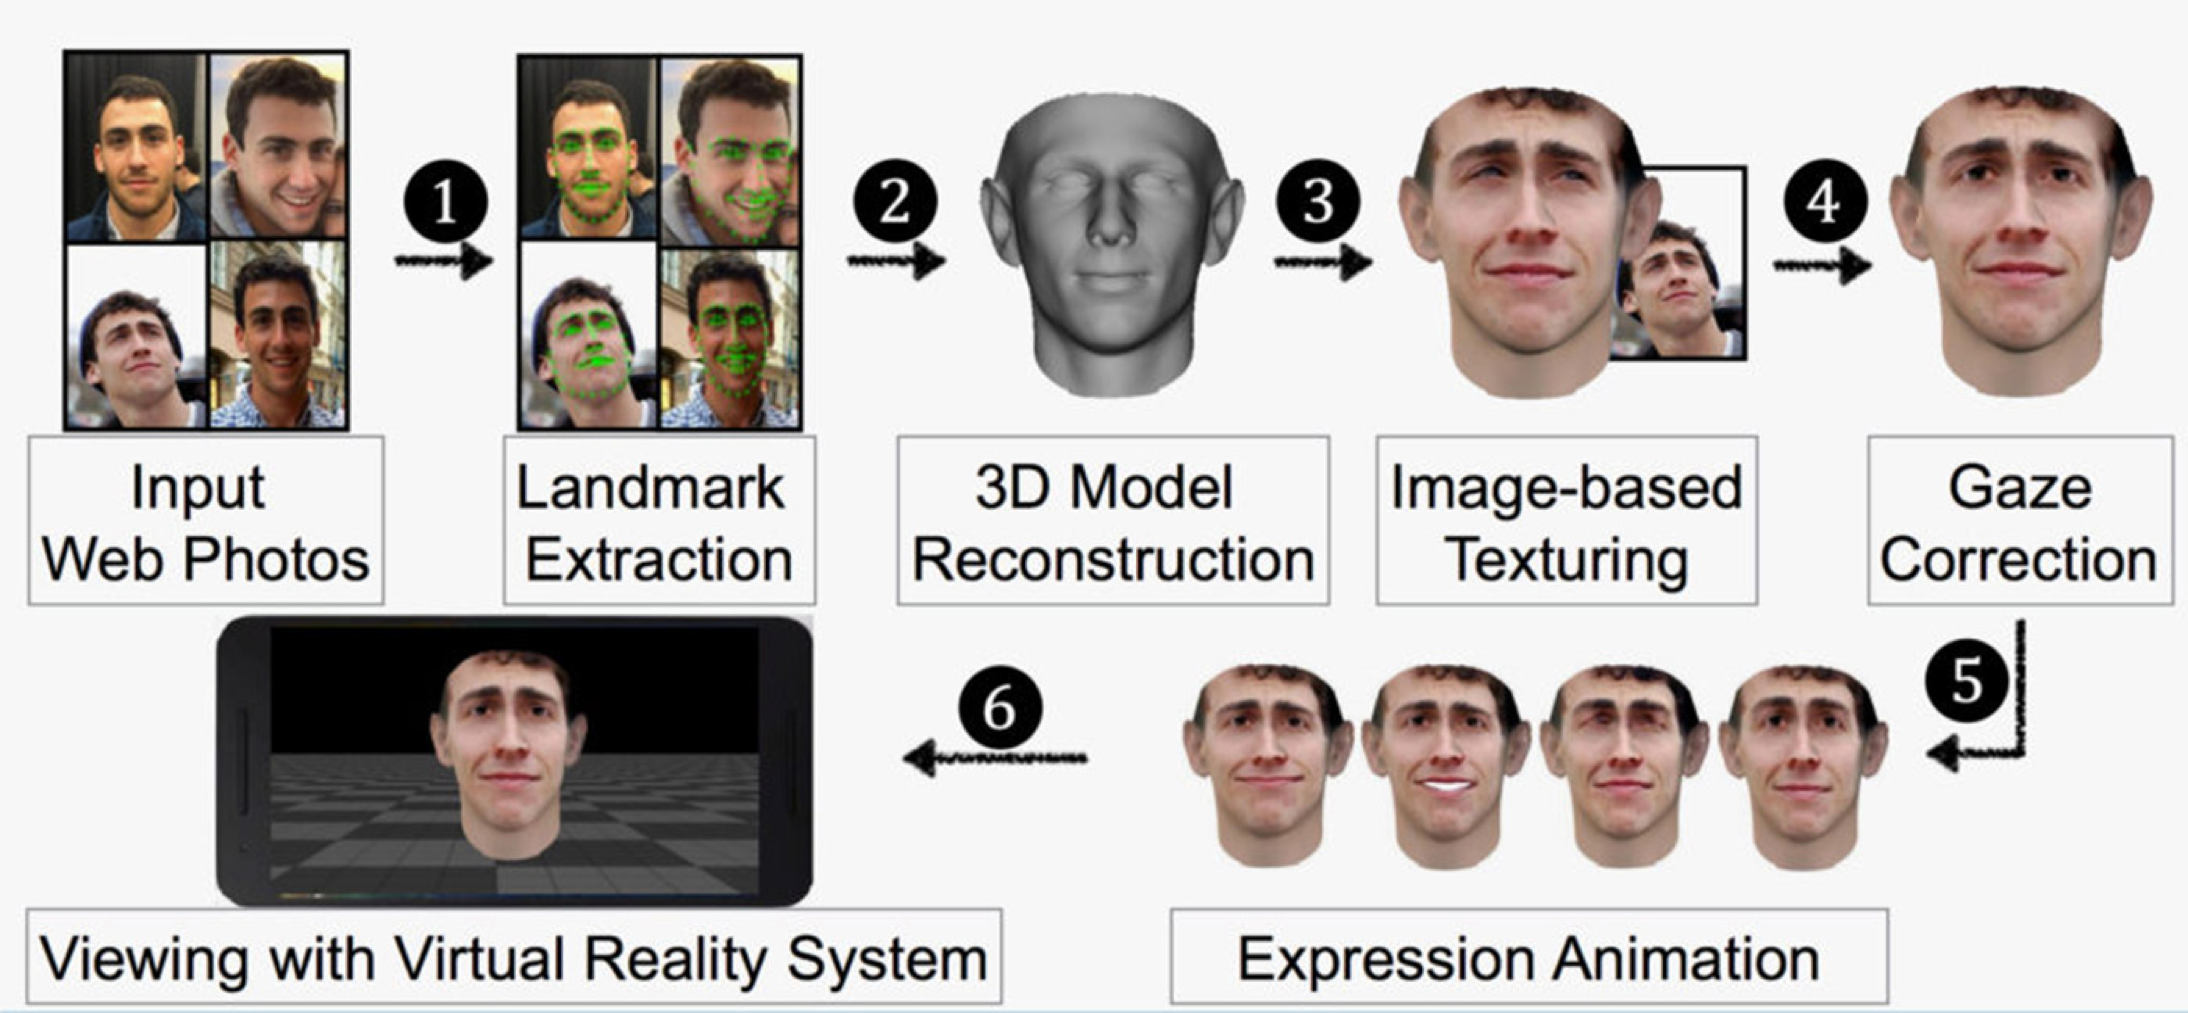 3D models based on Facebook images can fool facial recognition systems | Cyber Defense ...2188 x 1013